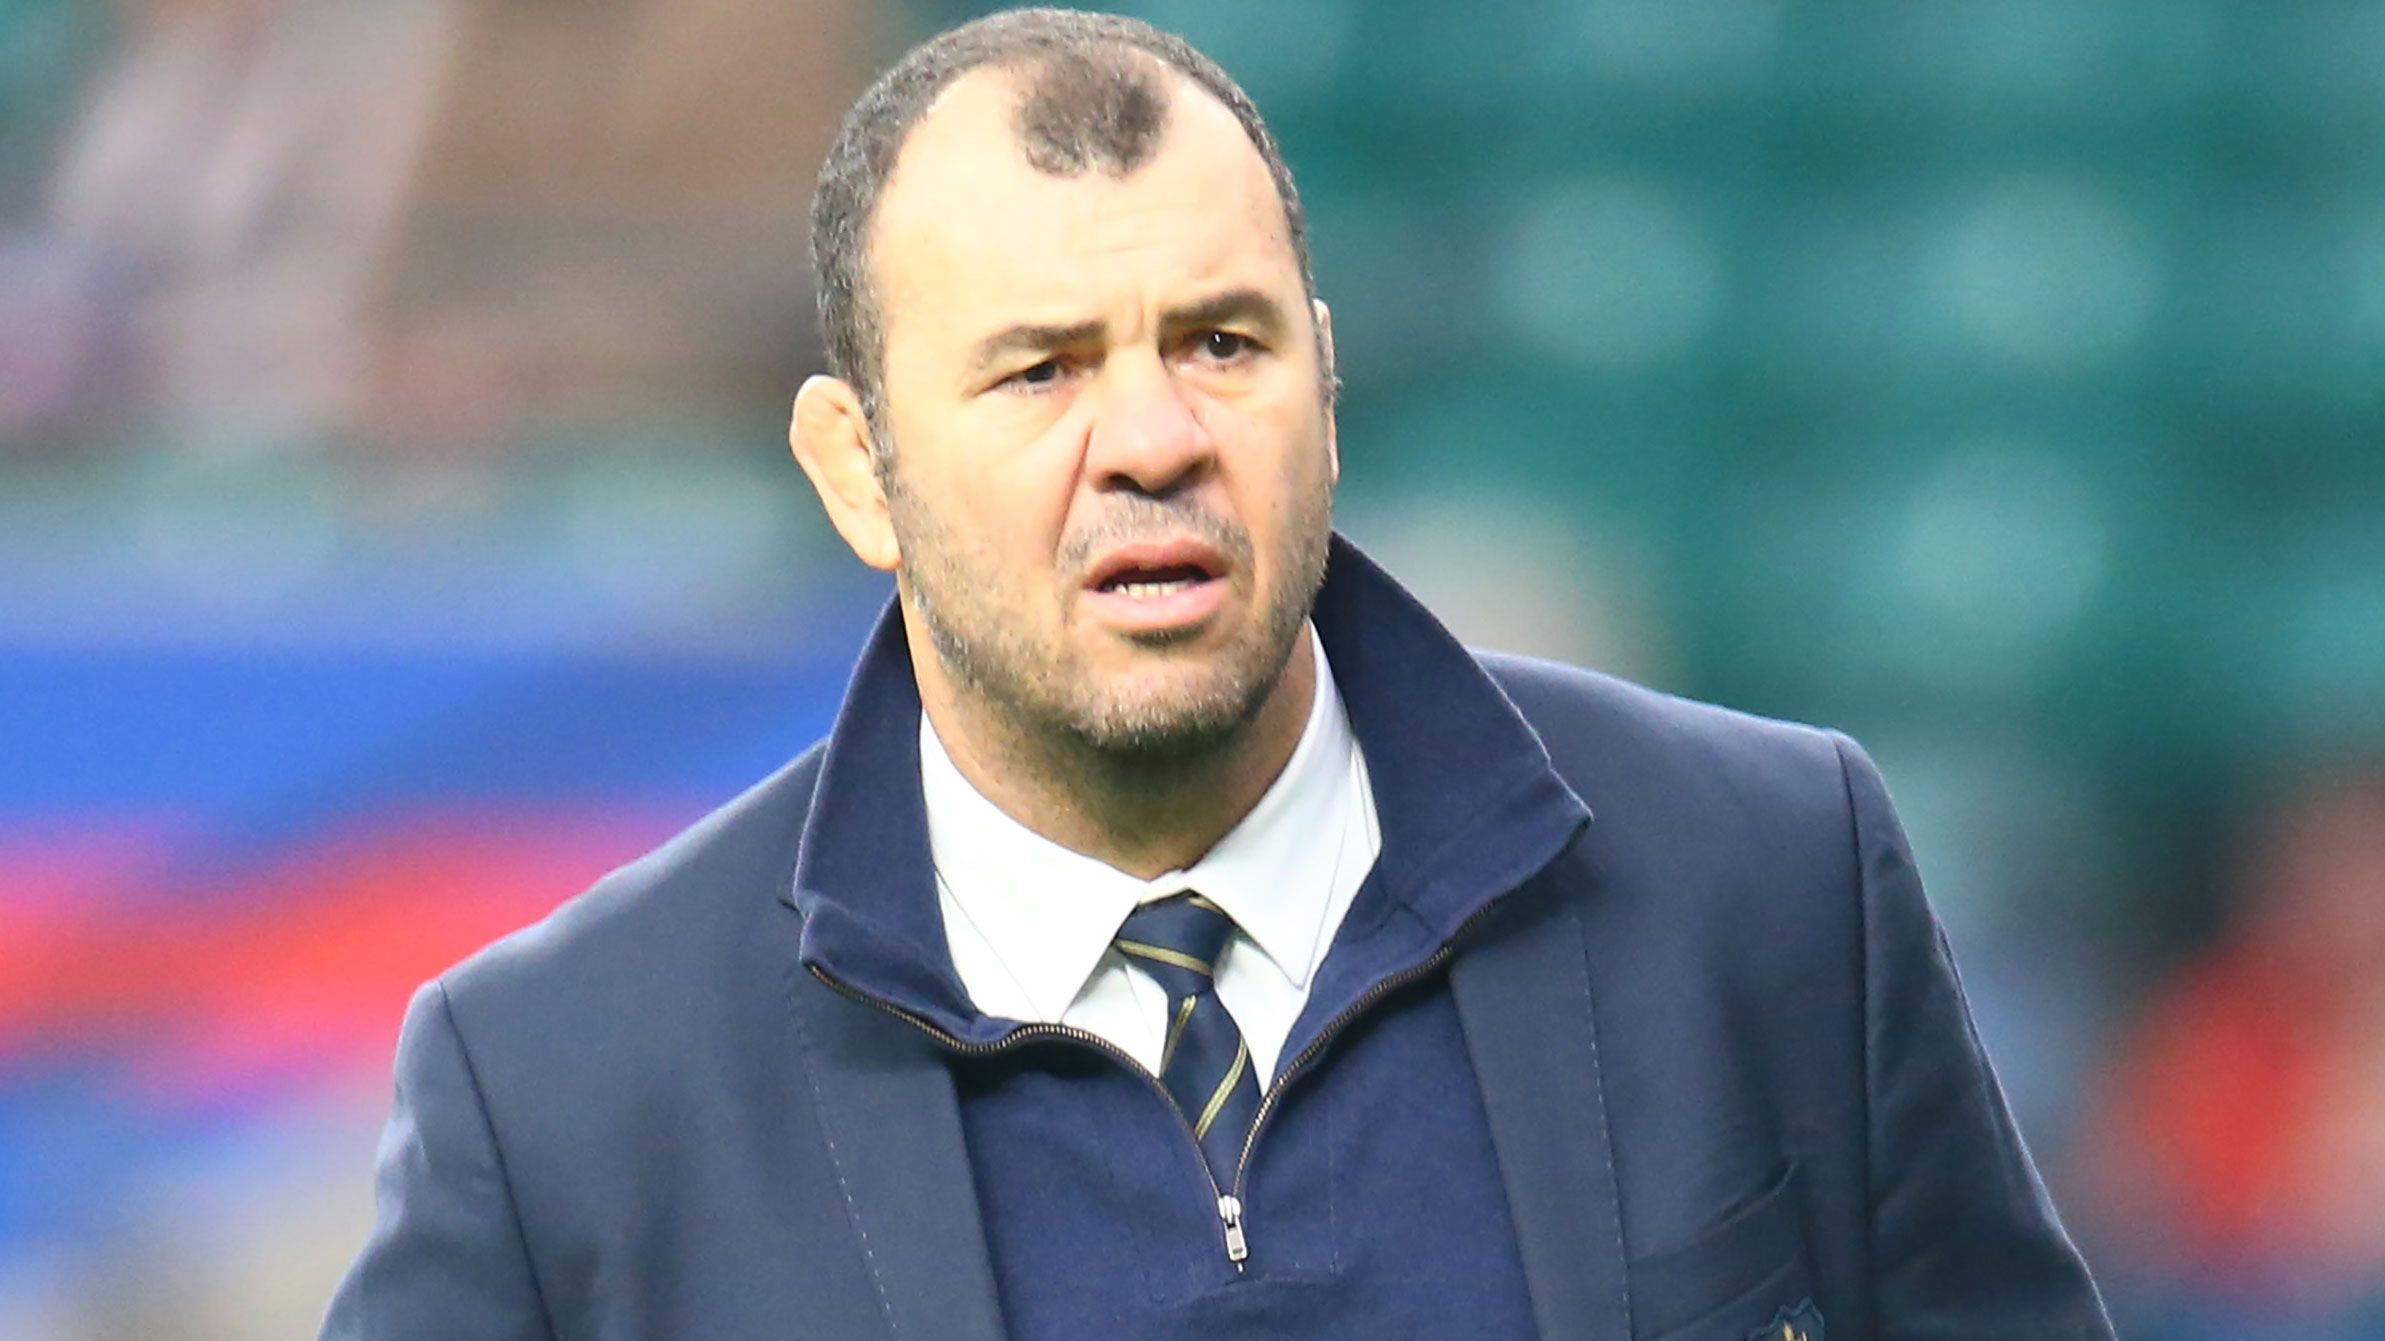 Wallabies legend Peter FitzSimons unsure about Rugby Australia move to save Michael Cheika